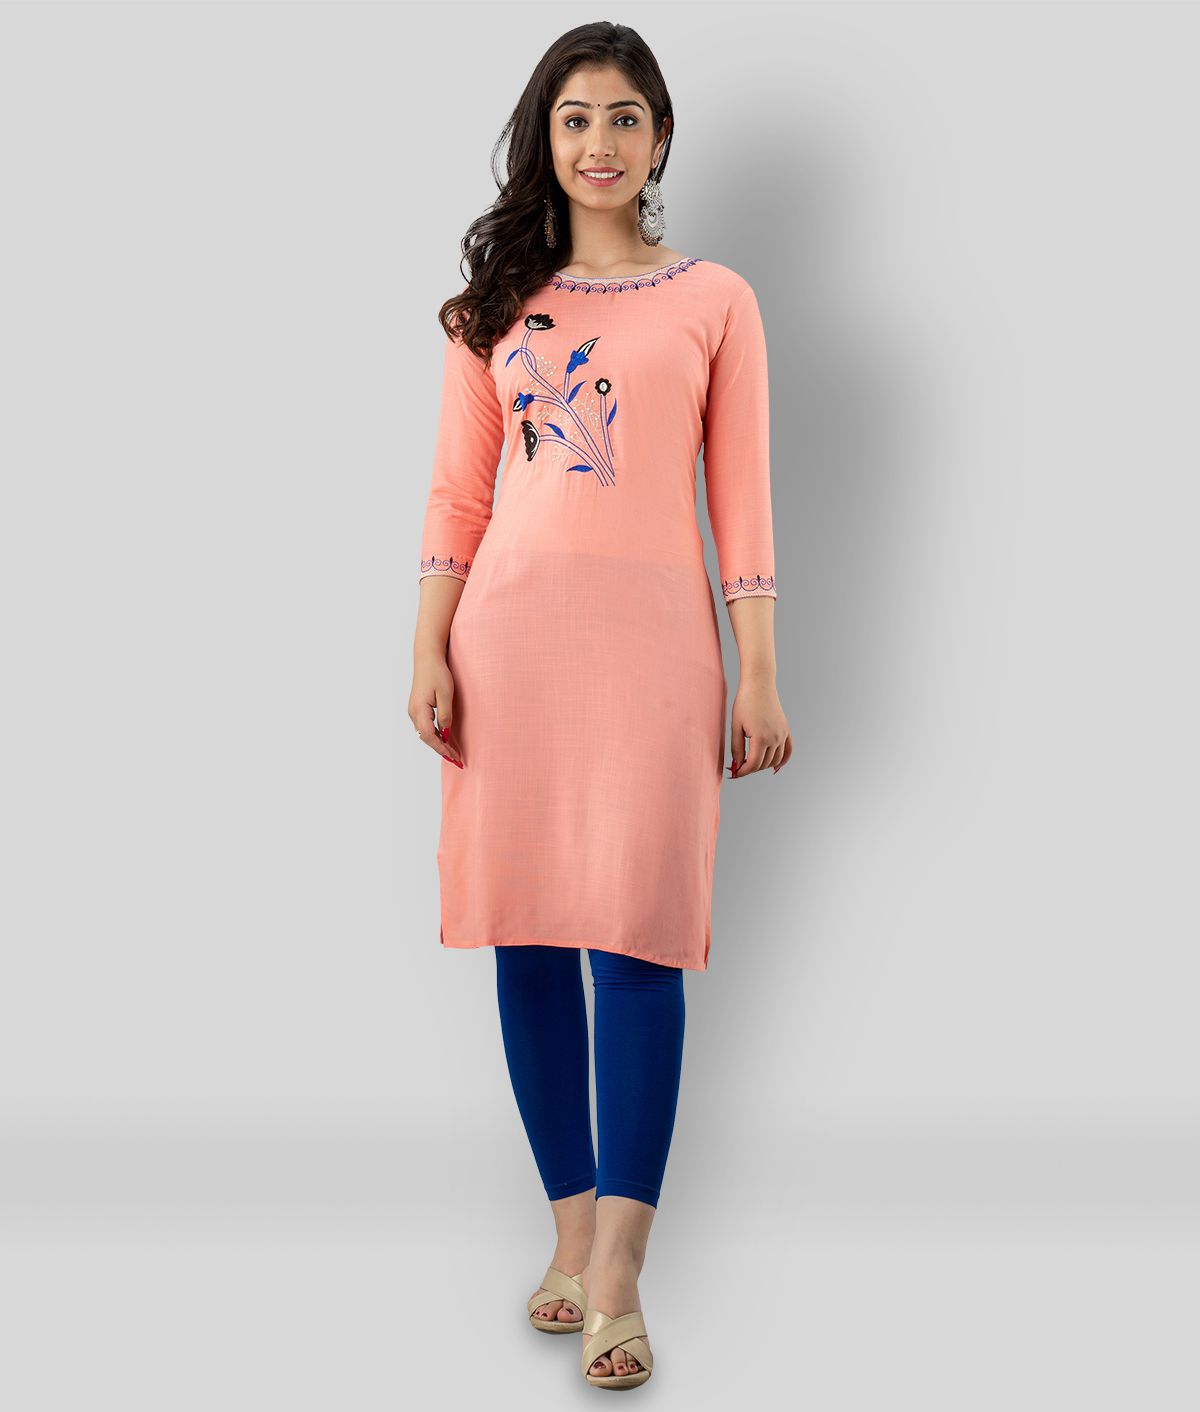 DESHBANDHU DBK  Multicolor Cotton Womens Straight Kurti  Pack of 2    Buy DESHBANDHU DBK  Multicolor Cotton Womens Straight Kurti  Pack of 2   Online at Best Prices in India on Snapdeal